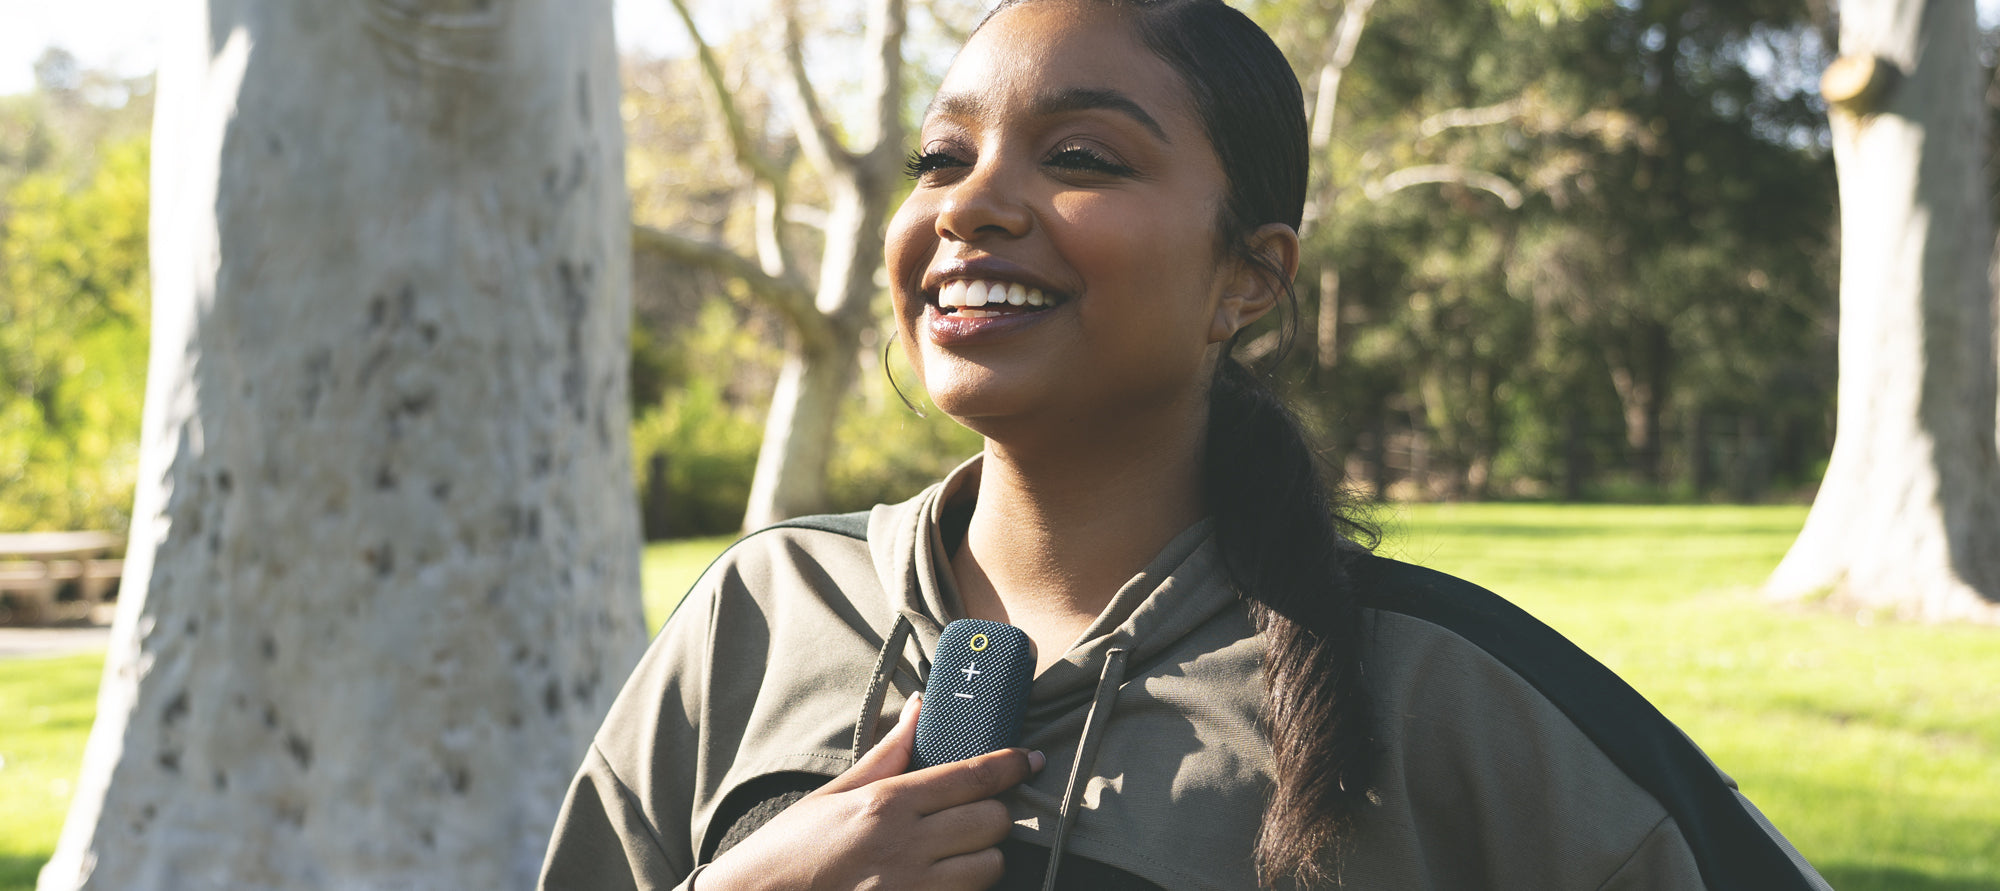 Smiling woman with a ponytail holding a smartphone, standing outdoors in a sunlit park with trees in the background.